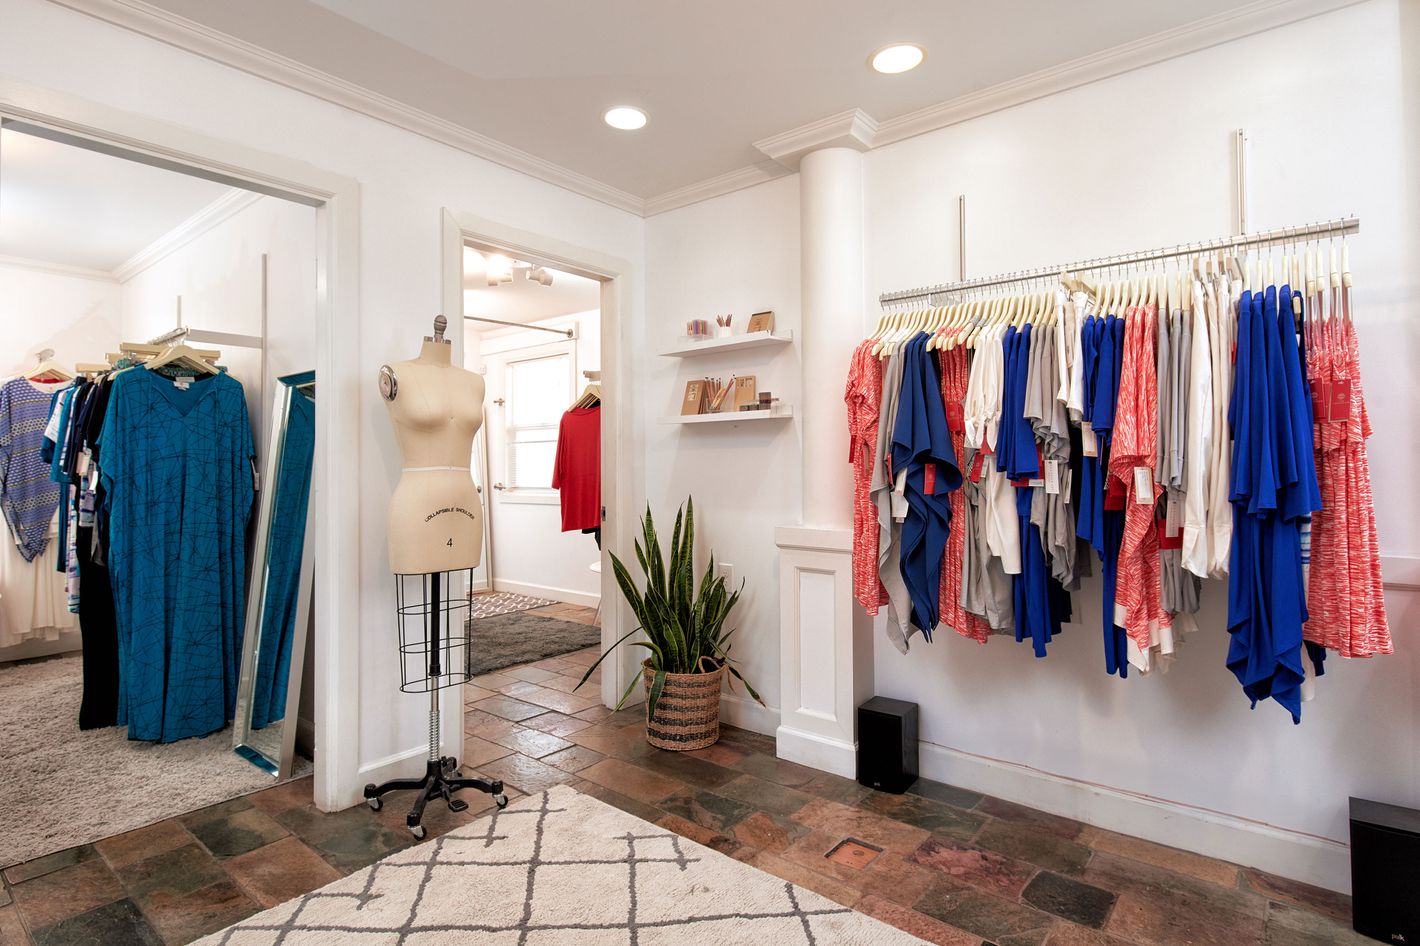 The Best Boutiques in Honolulu, According to Locals